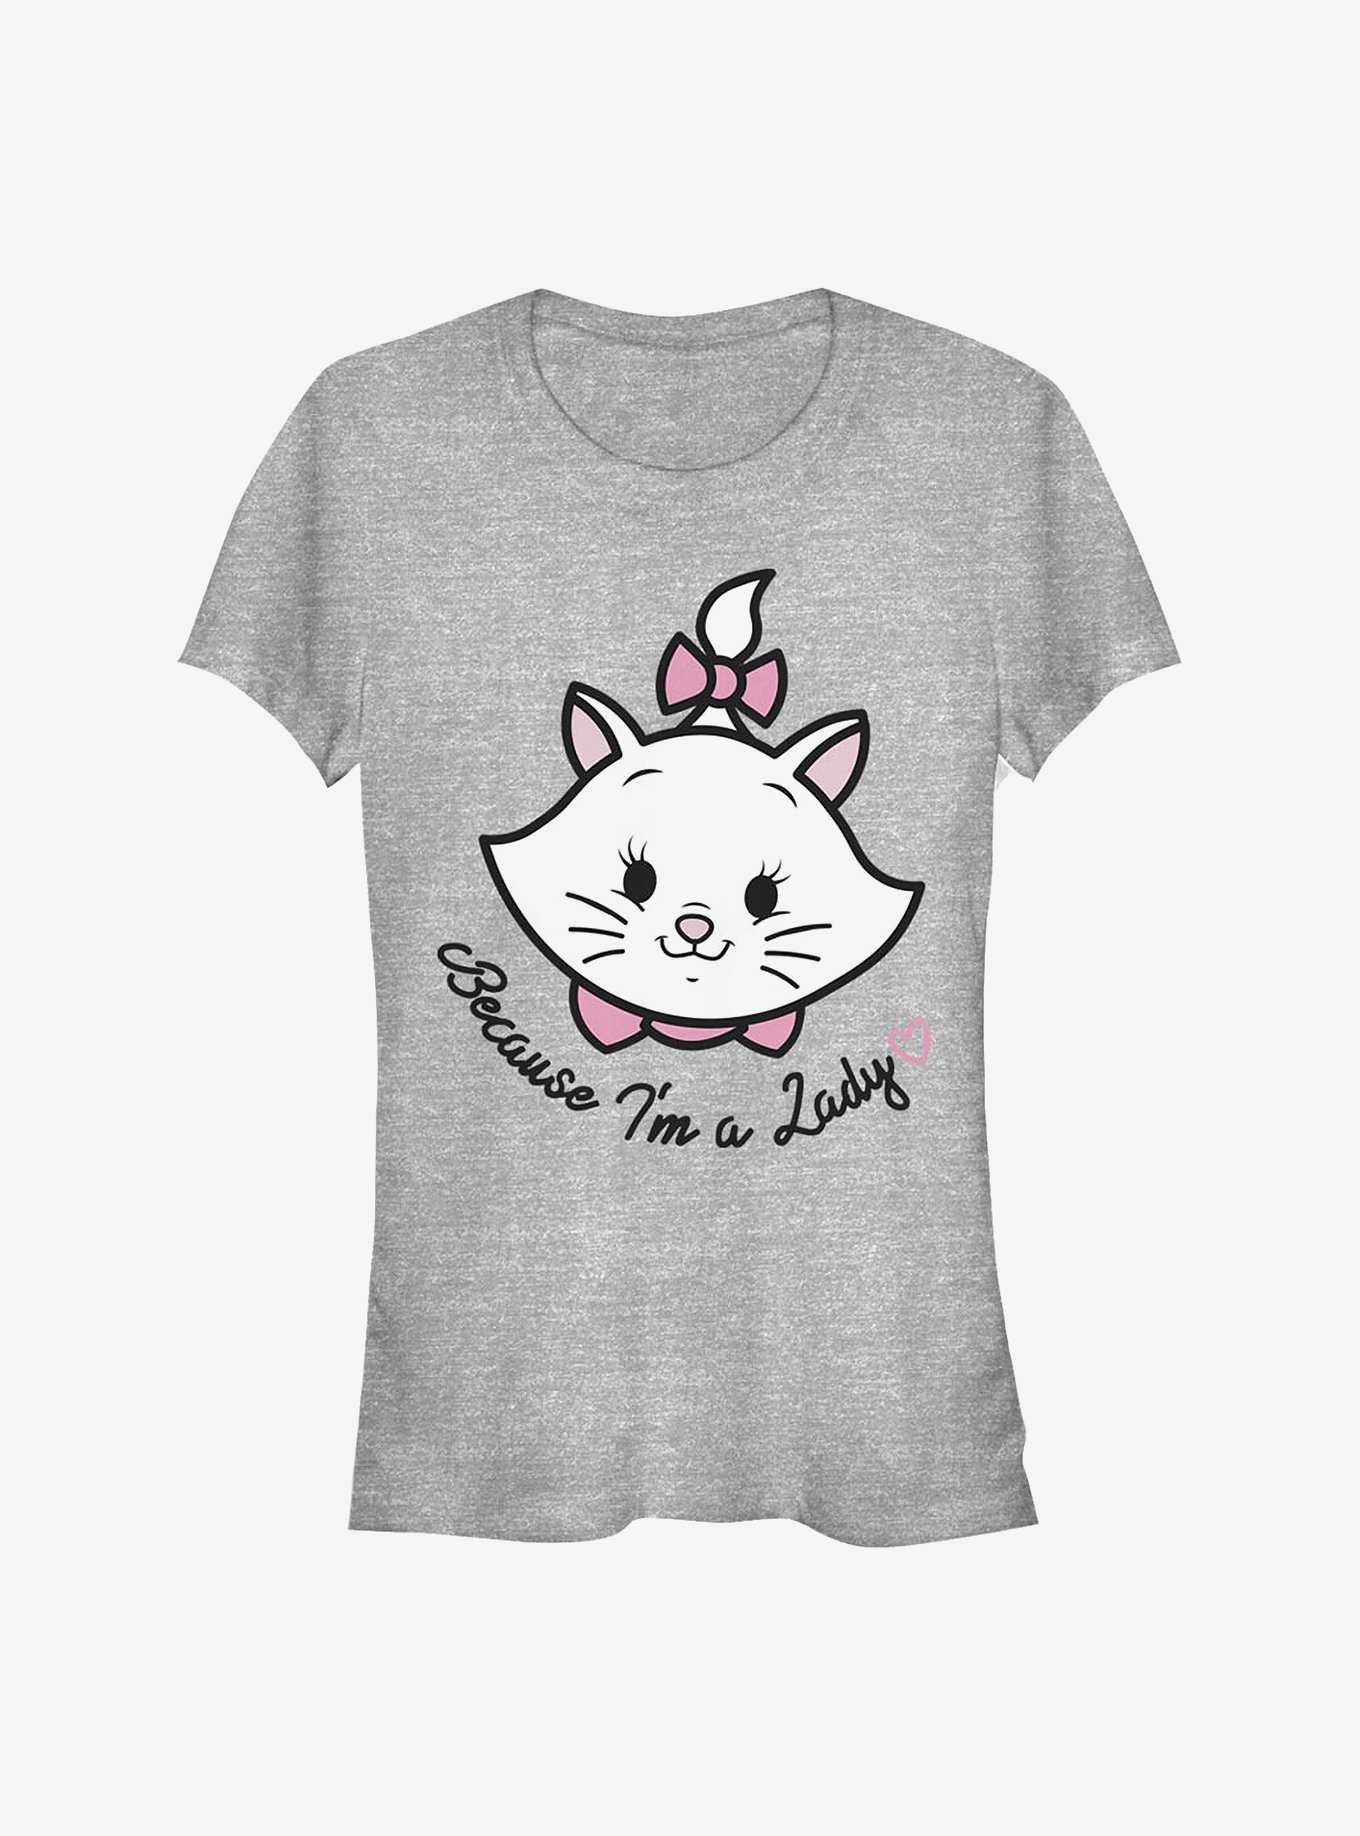 Merch Hot Plushies, | Shirts Aristocats OFFICIAL & Topic